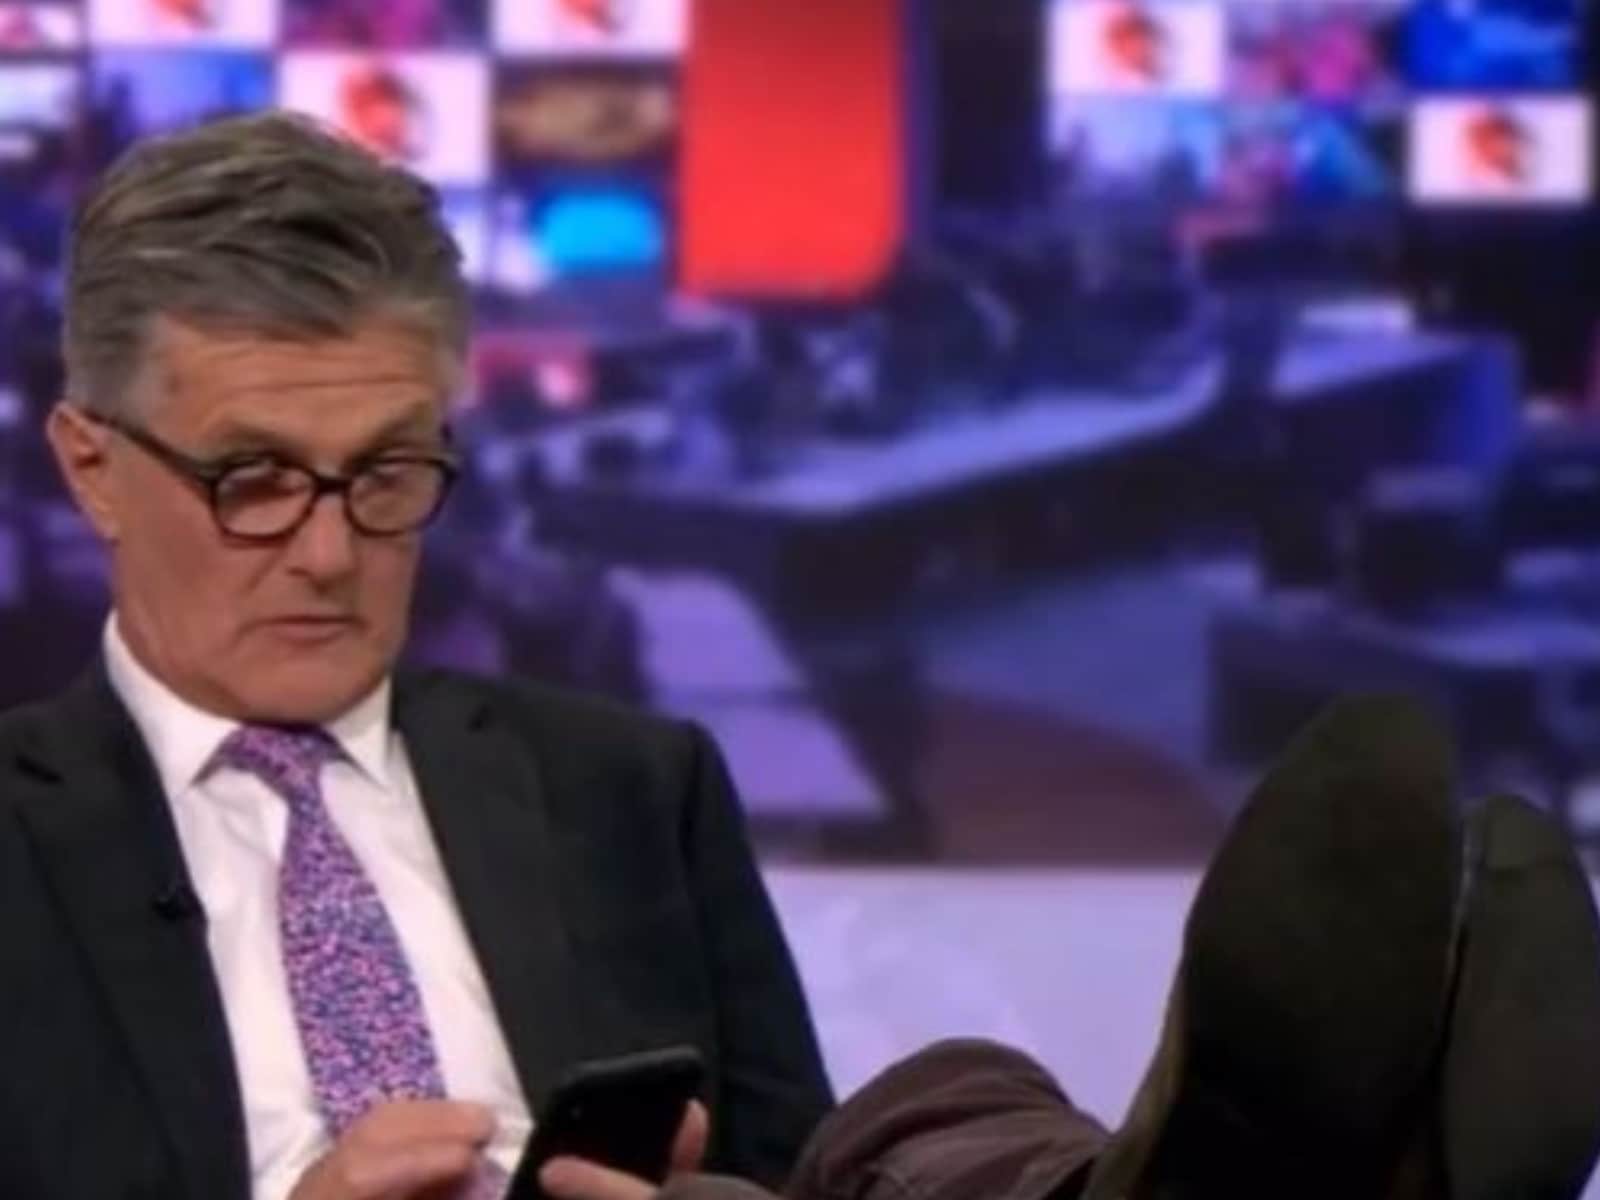 BBC anchor Tim Willcox caught off guard with feet on desk during live TV